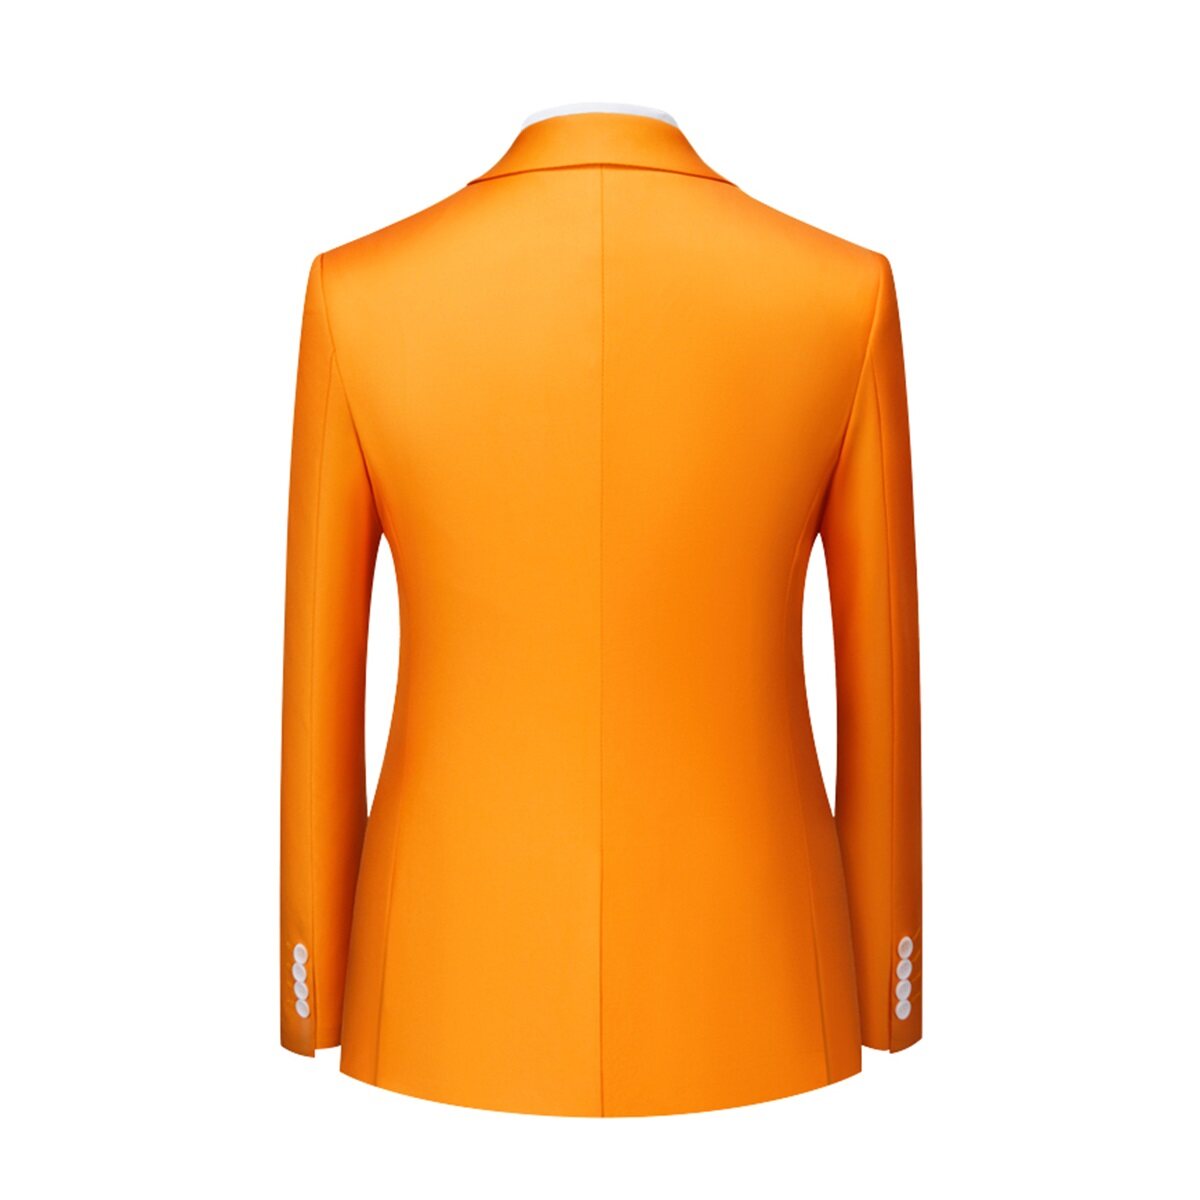 Men's Solid Color Double Breasted Business Suit Orange